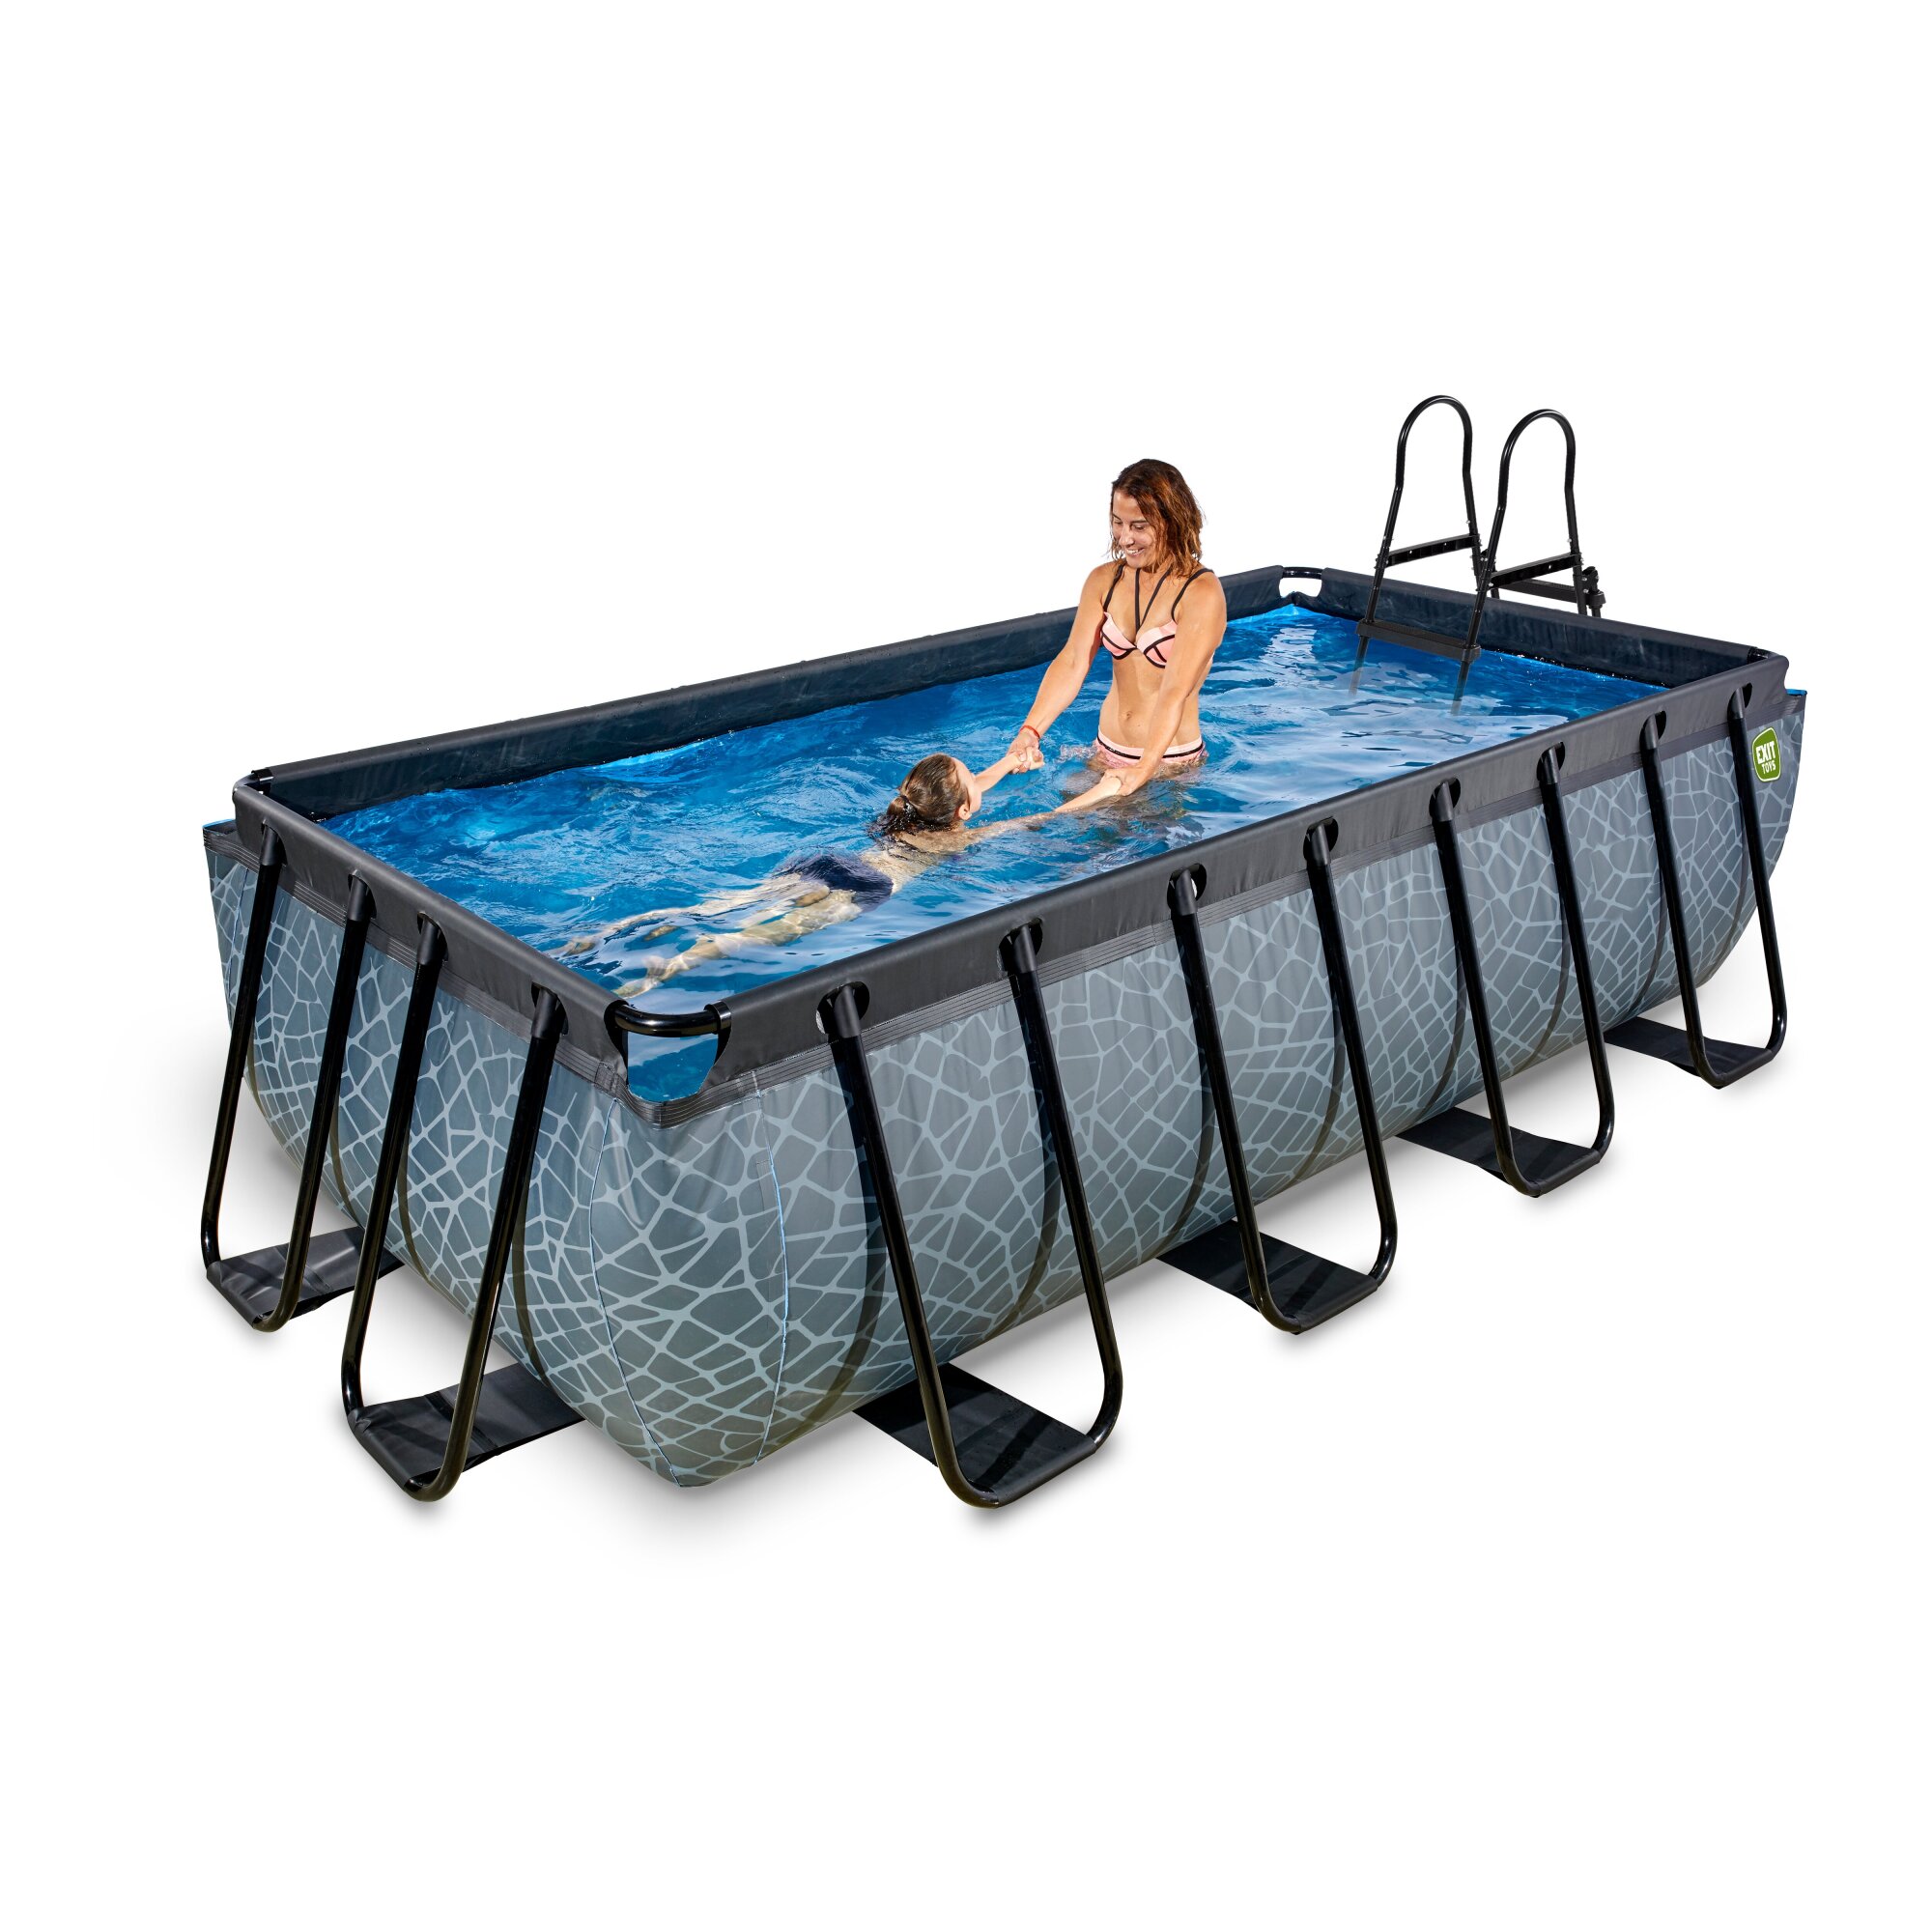 EXIT Stone pool 400x200x100cm with filter pump - grey